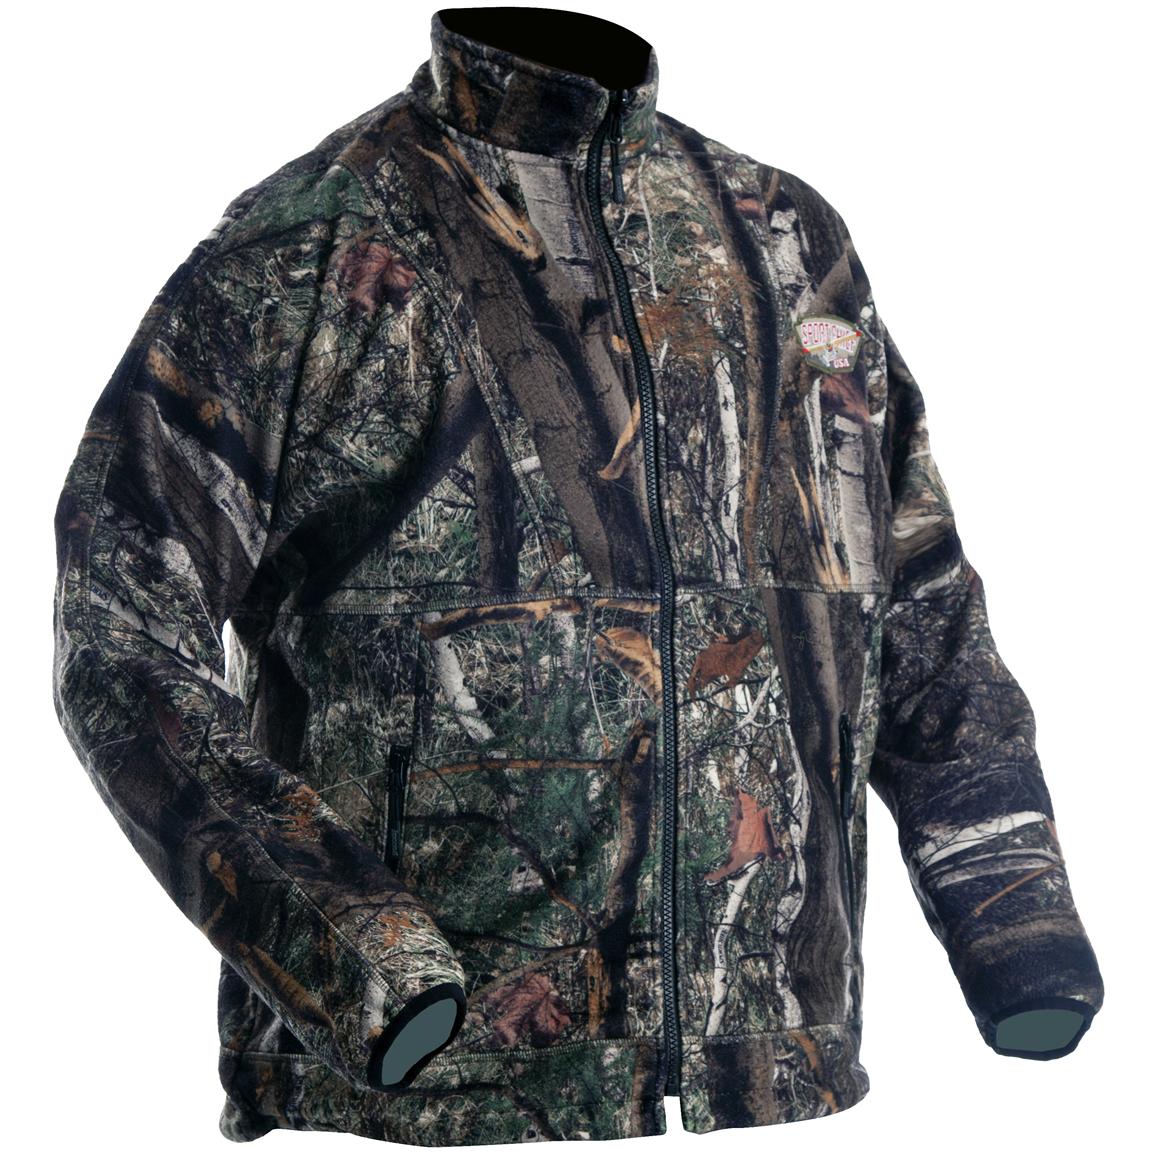 SportChief® Patriot Jacket - 294161, Camo Jackets at Sportsman's Guide